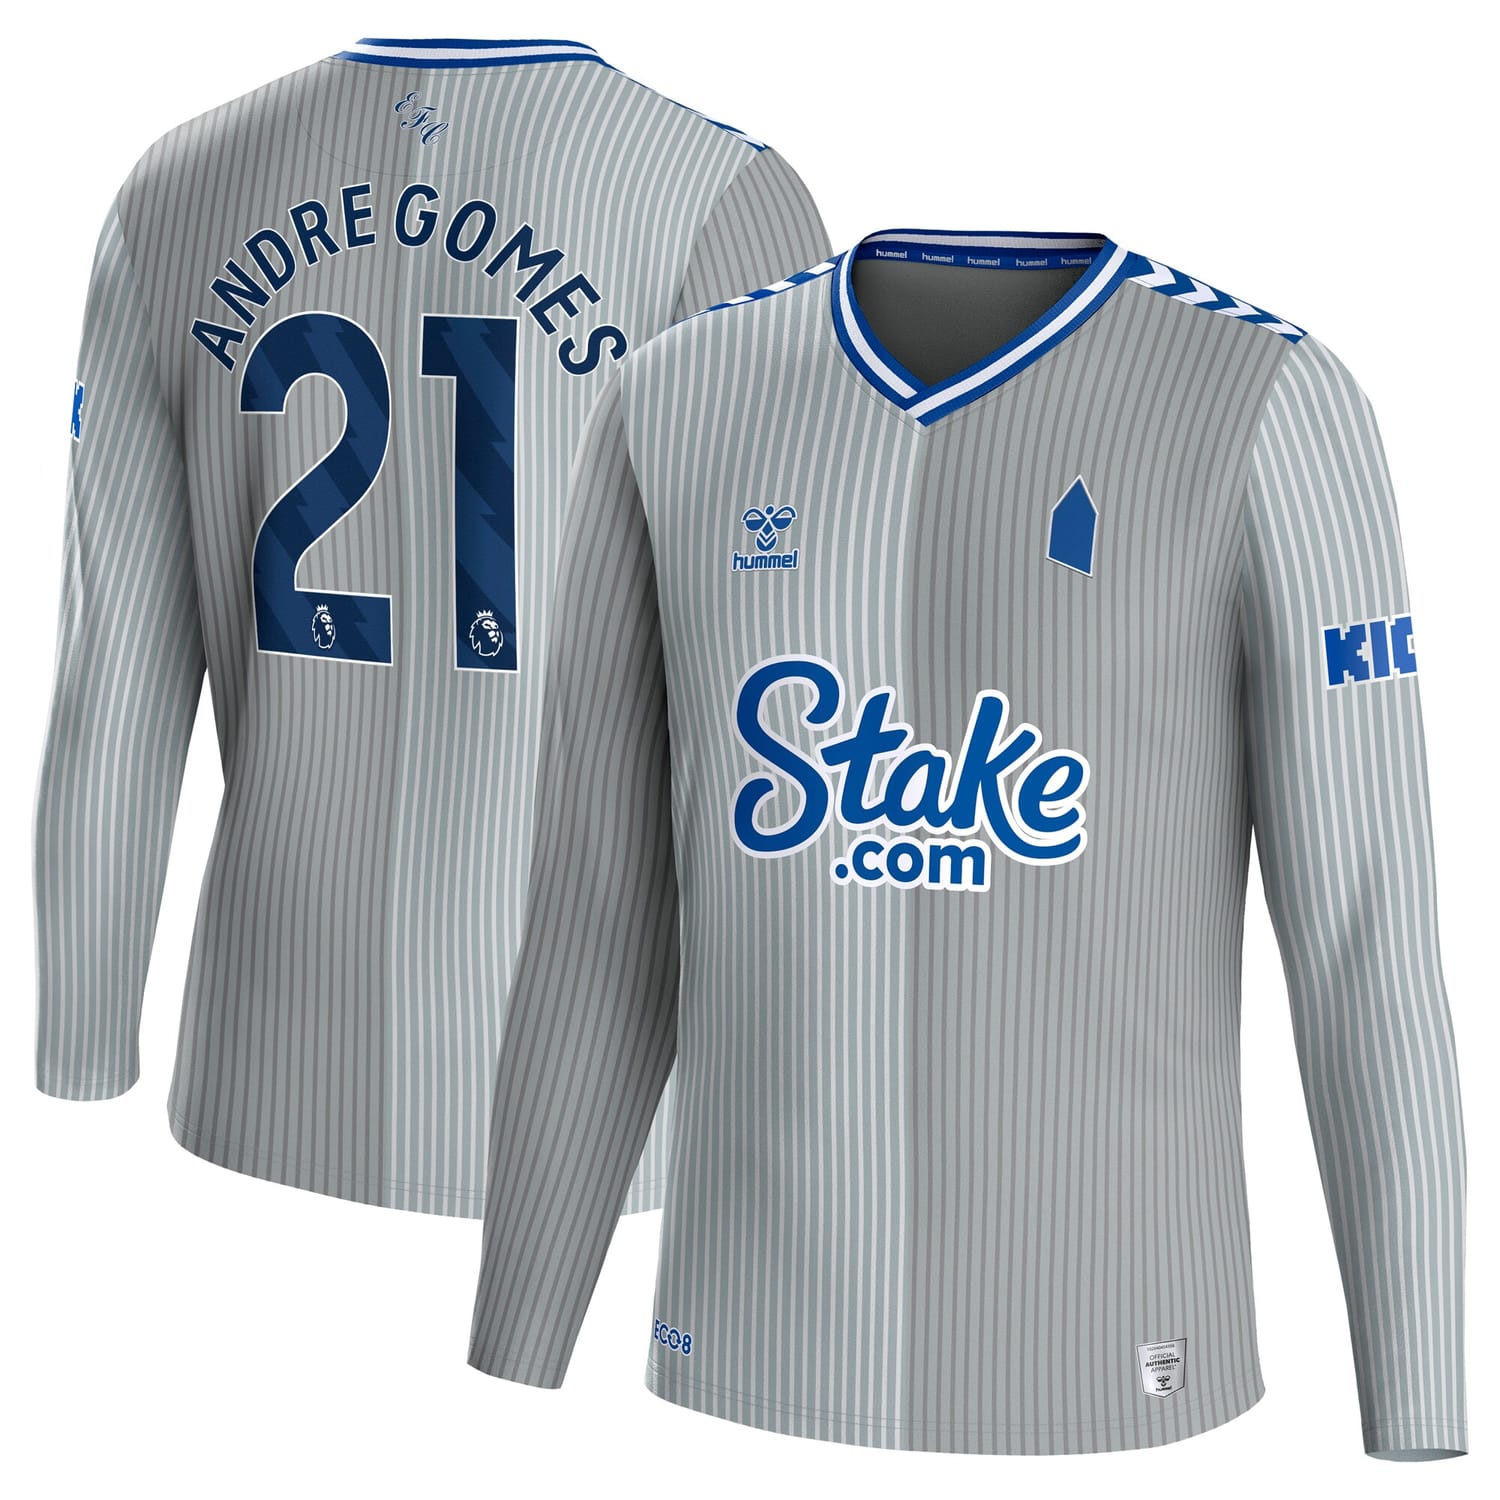 Premier League Everton Third Jersey Shirt Long Sleeve 2023-24 player Andre Gomes 21 printing for Men